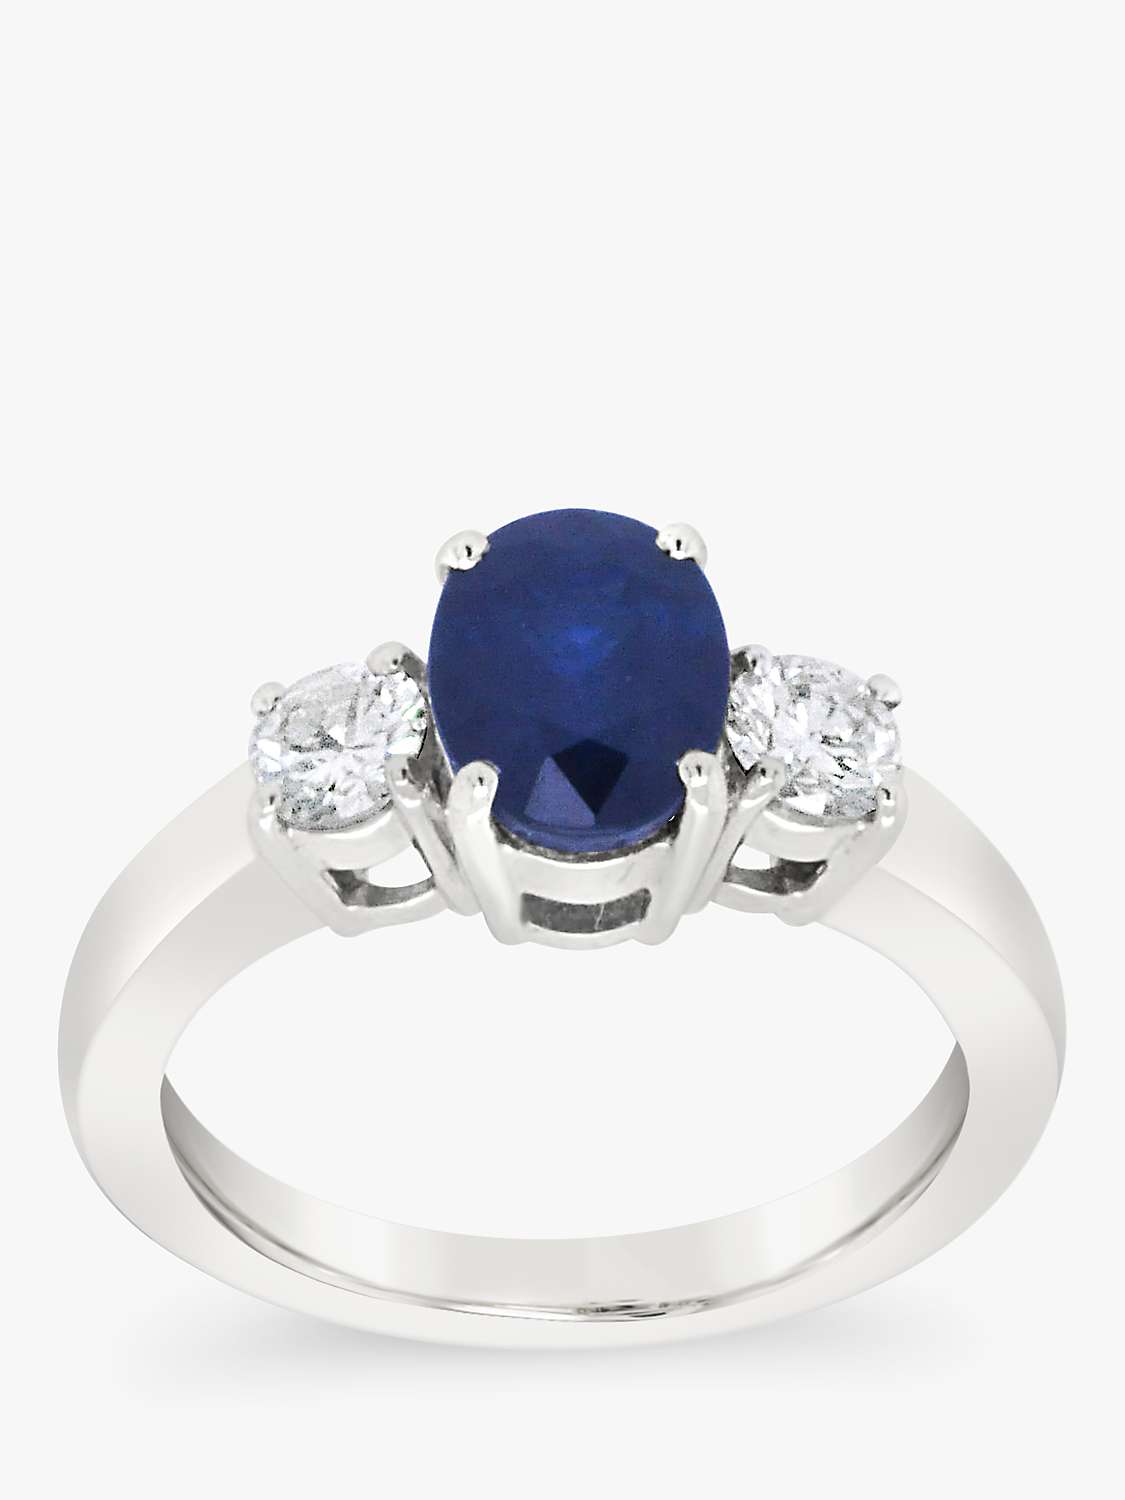 Buy Milton & Humble Jewellery 18ct White Gold  Second Hand Sapphire and Diamond Ring Online at johnlewis.com